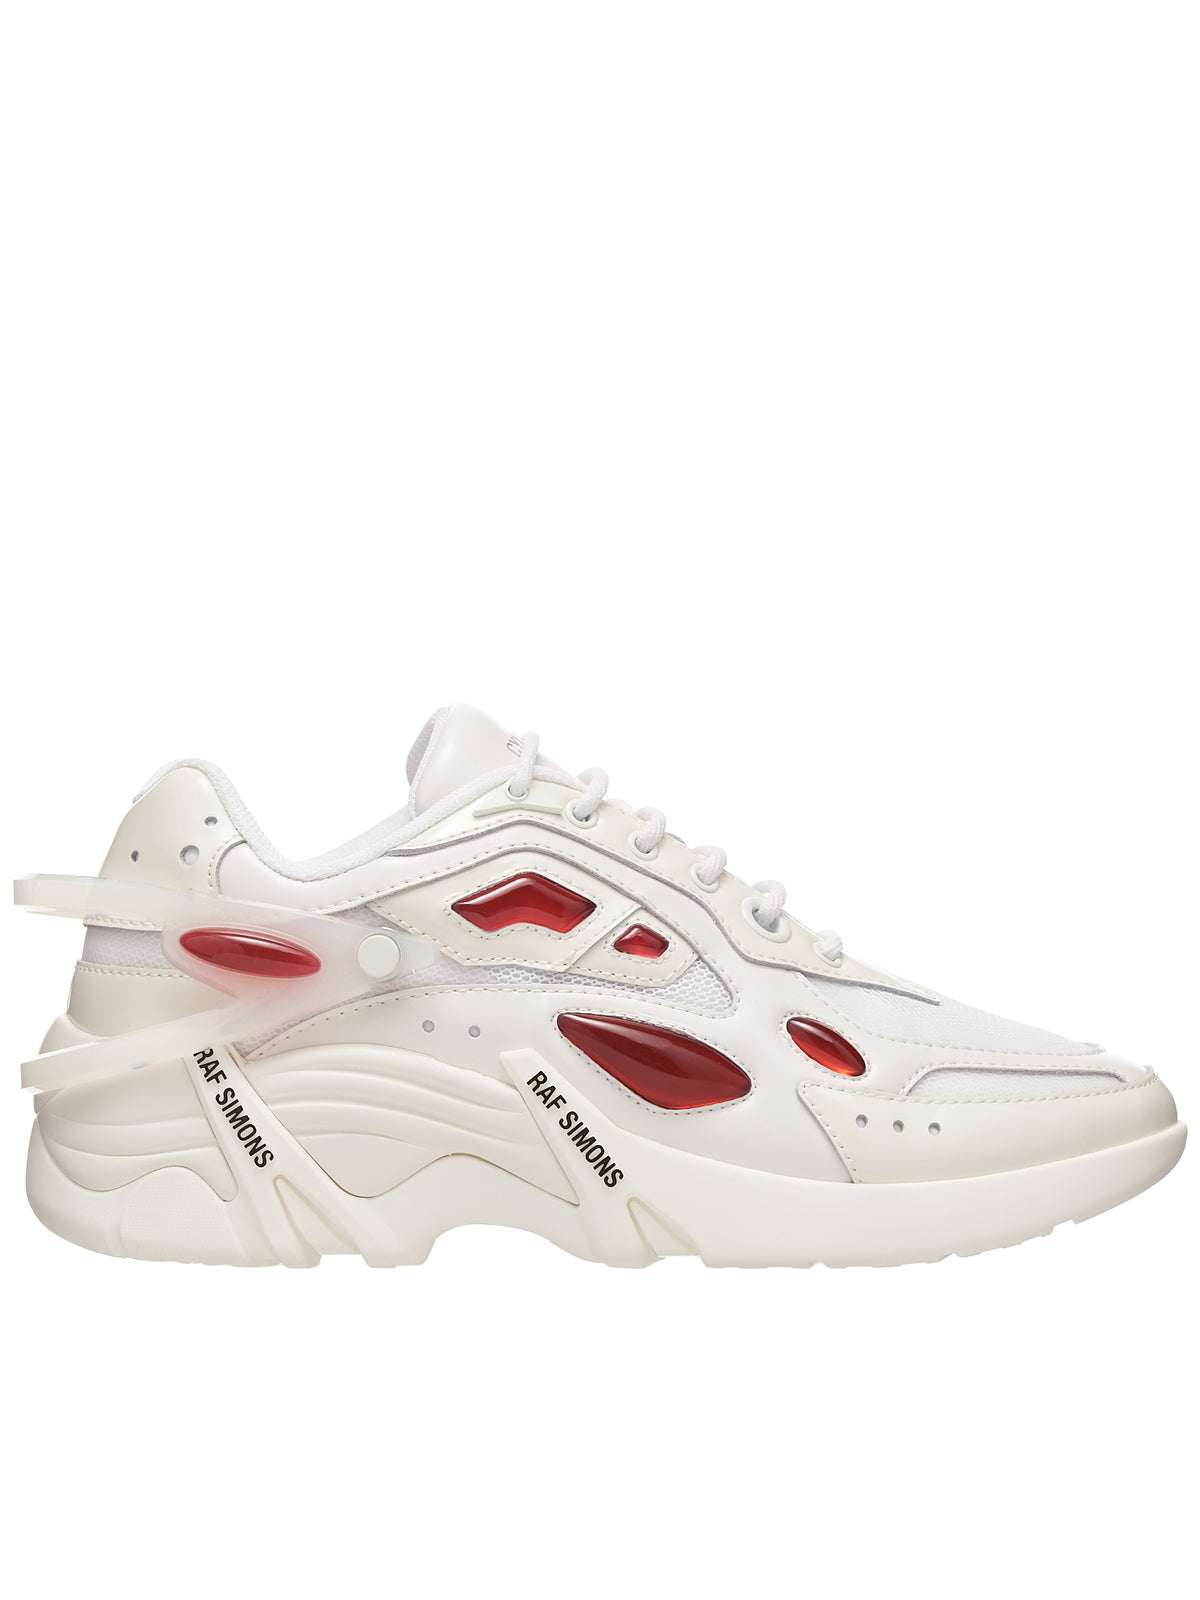 Cyclon-21 Sneakers (CYLON-21-OFF-WHITE-RED)